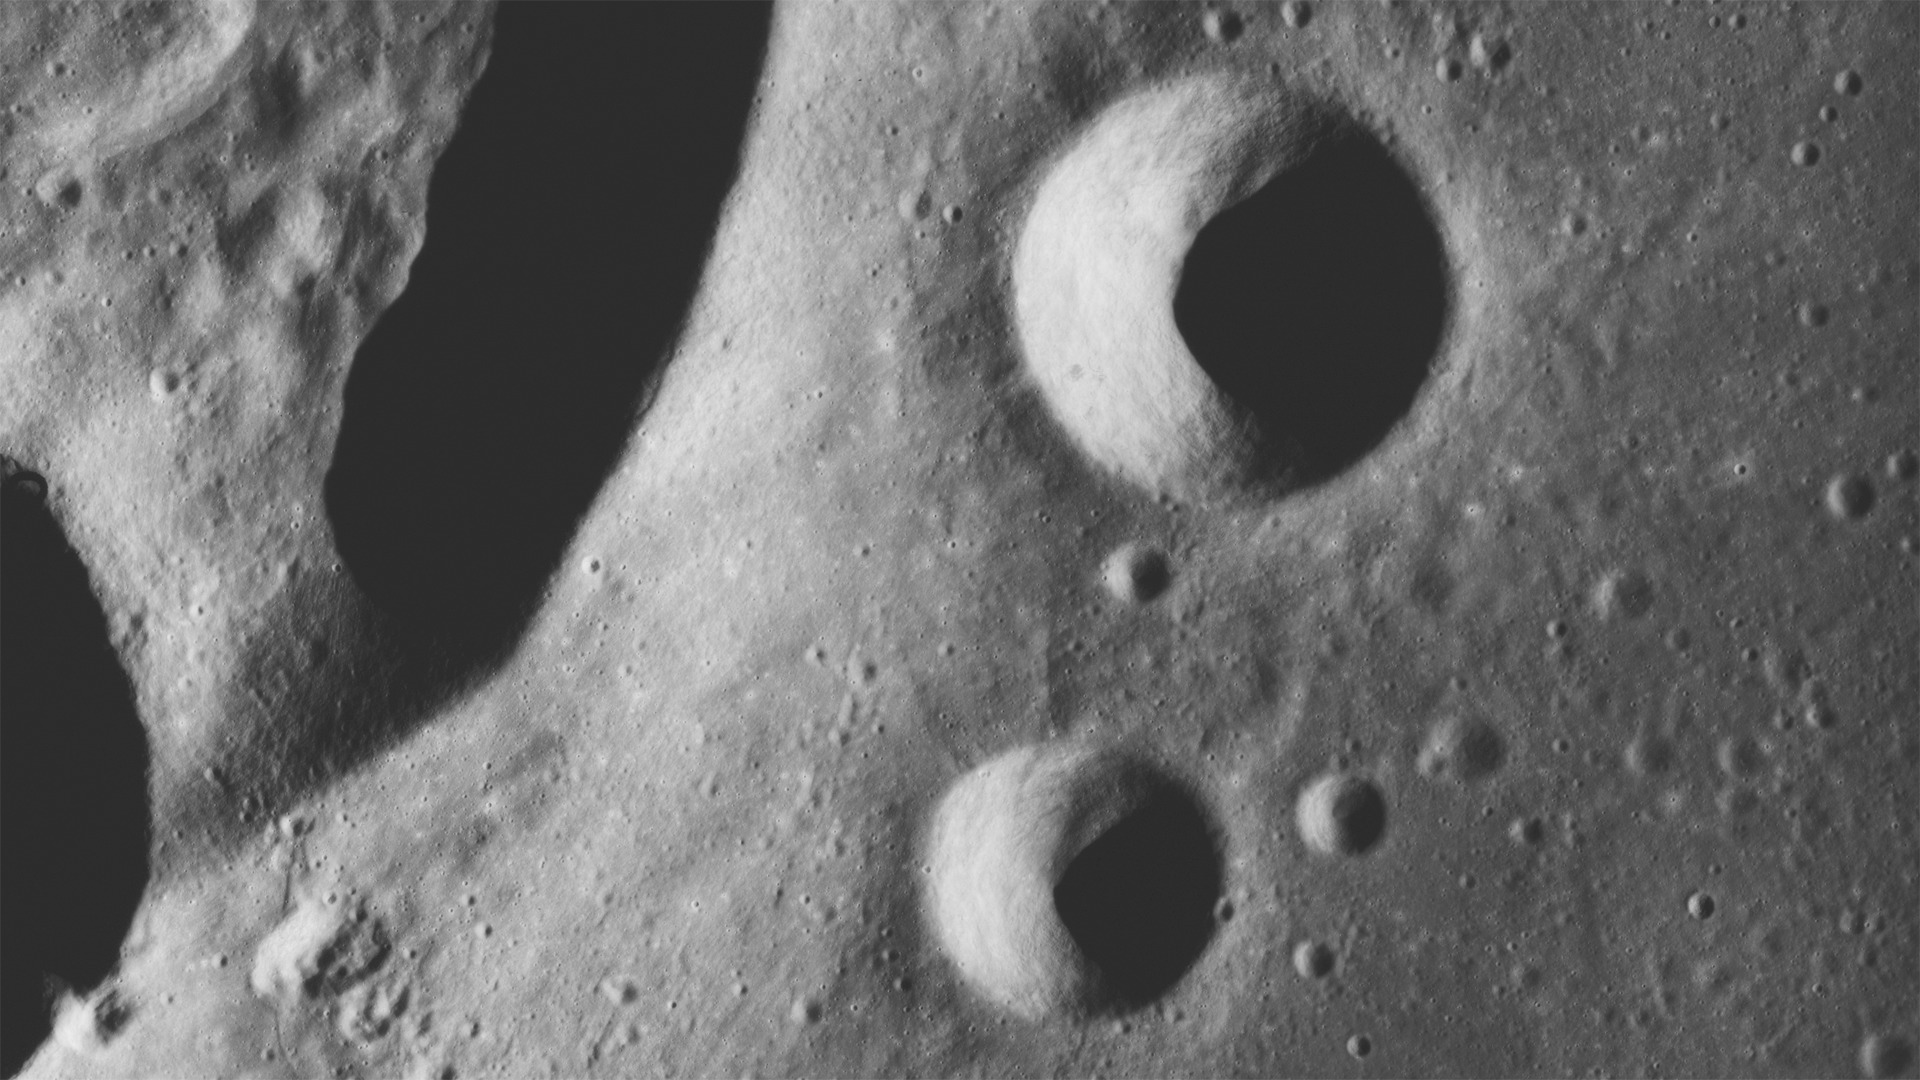 Stereo imagery featuring craters: Krieger, Rocco, Ruth and the edge of Van Biesbroeck. Stereoscopic imagery is provided for the left and right eye.